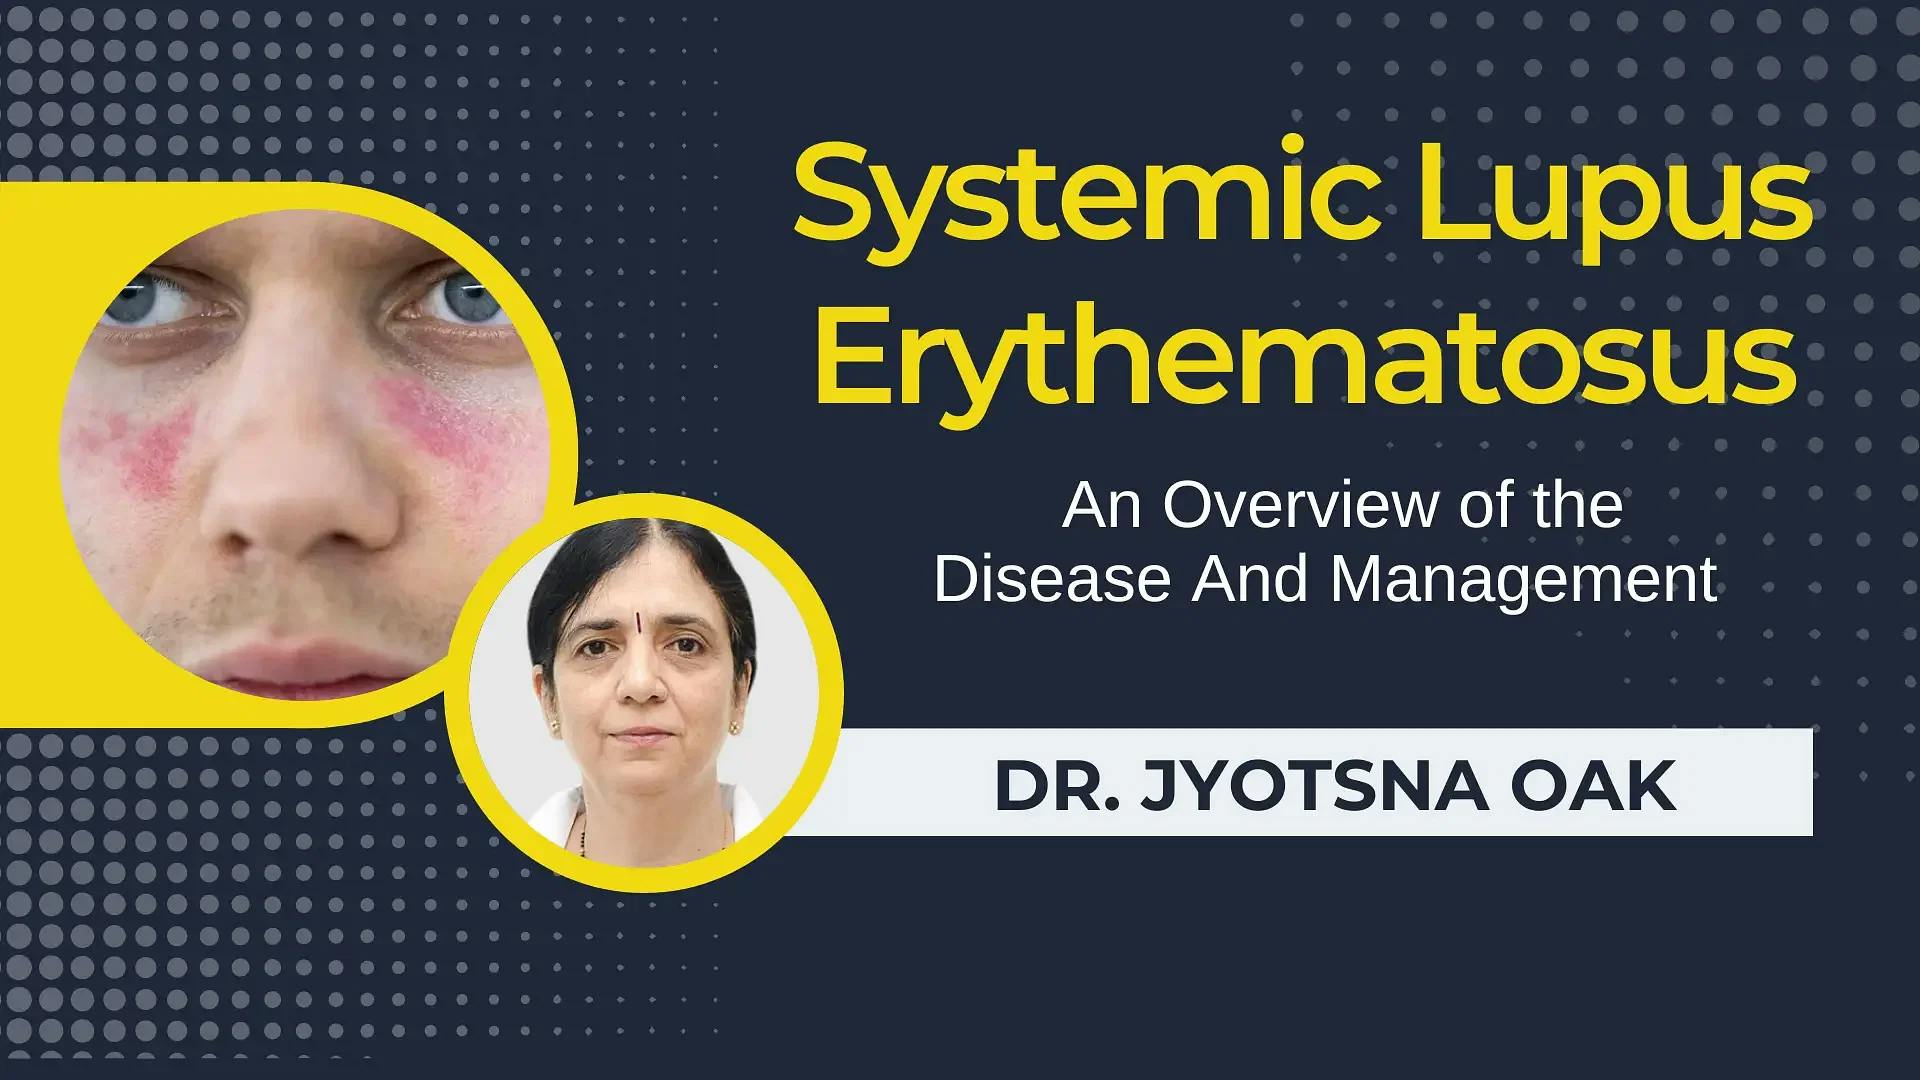 Systemic Lupus Erythematosus: An Overview of the Disease And Management 